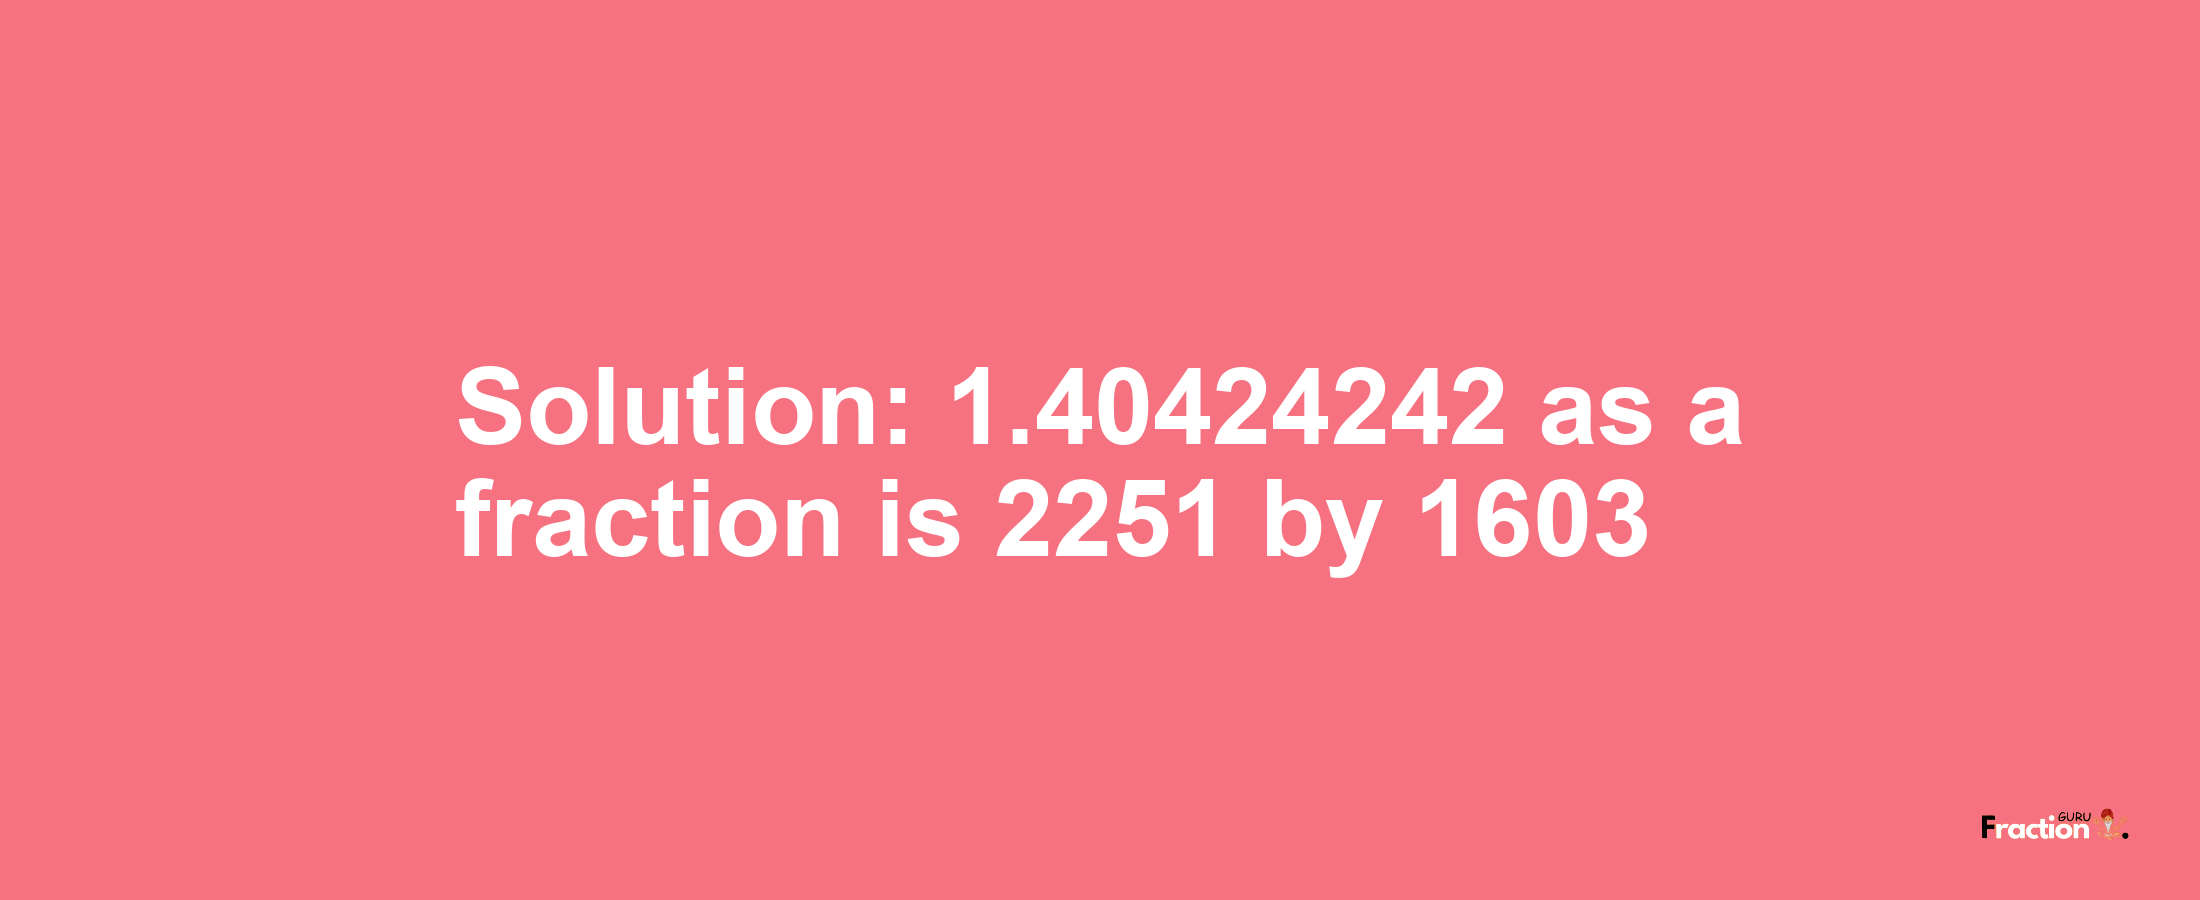 Solution:1.40424242 as a fraction is 2251/1603